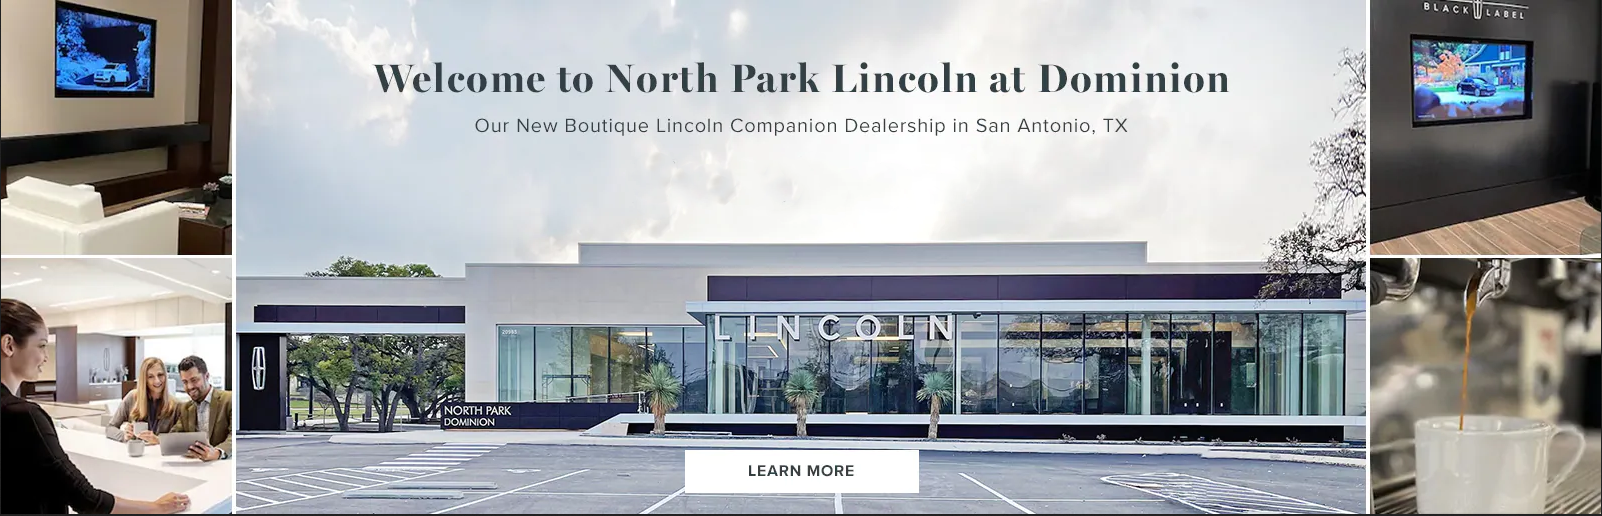 Welcome to North Park Lincoln at Dominion